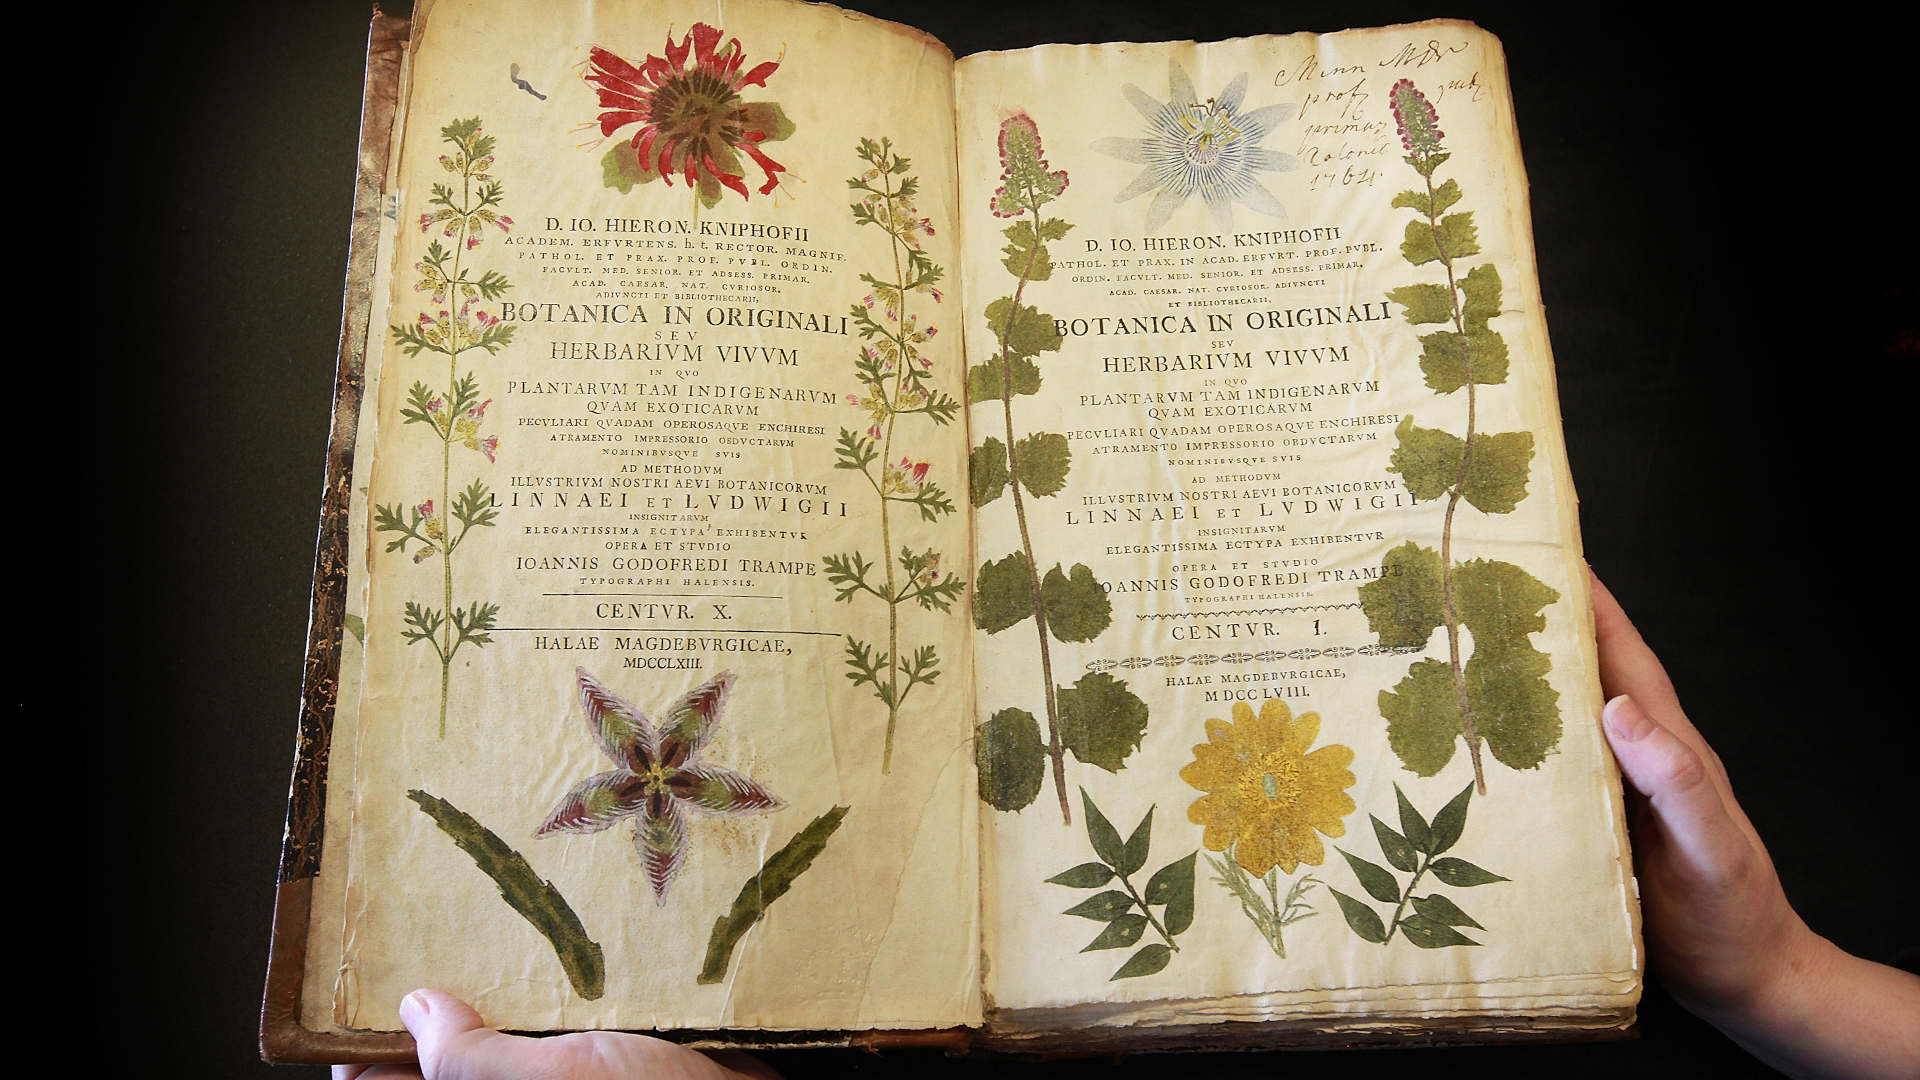 Top: A rare 18th century book containing nature prints is displayed at the Herbaruim library at the Royal Botanic Gardens, Kew, in London. Visual: Pet